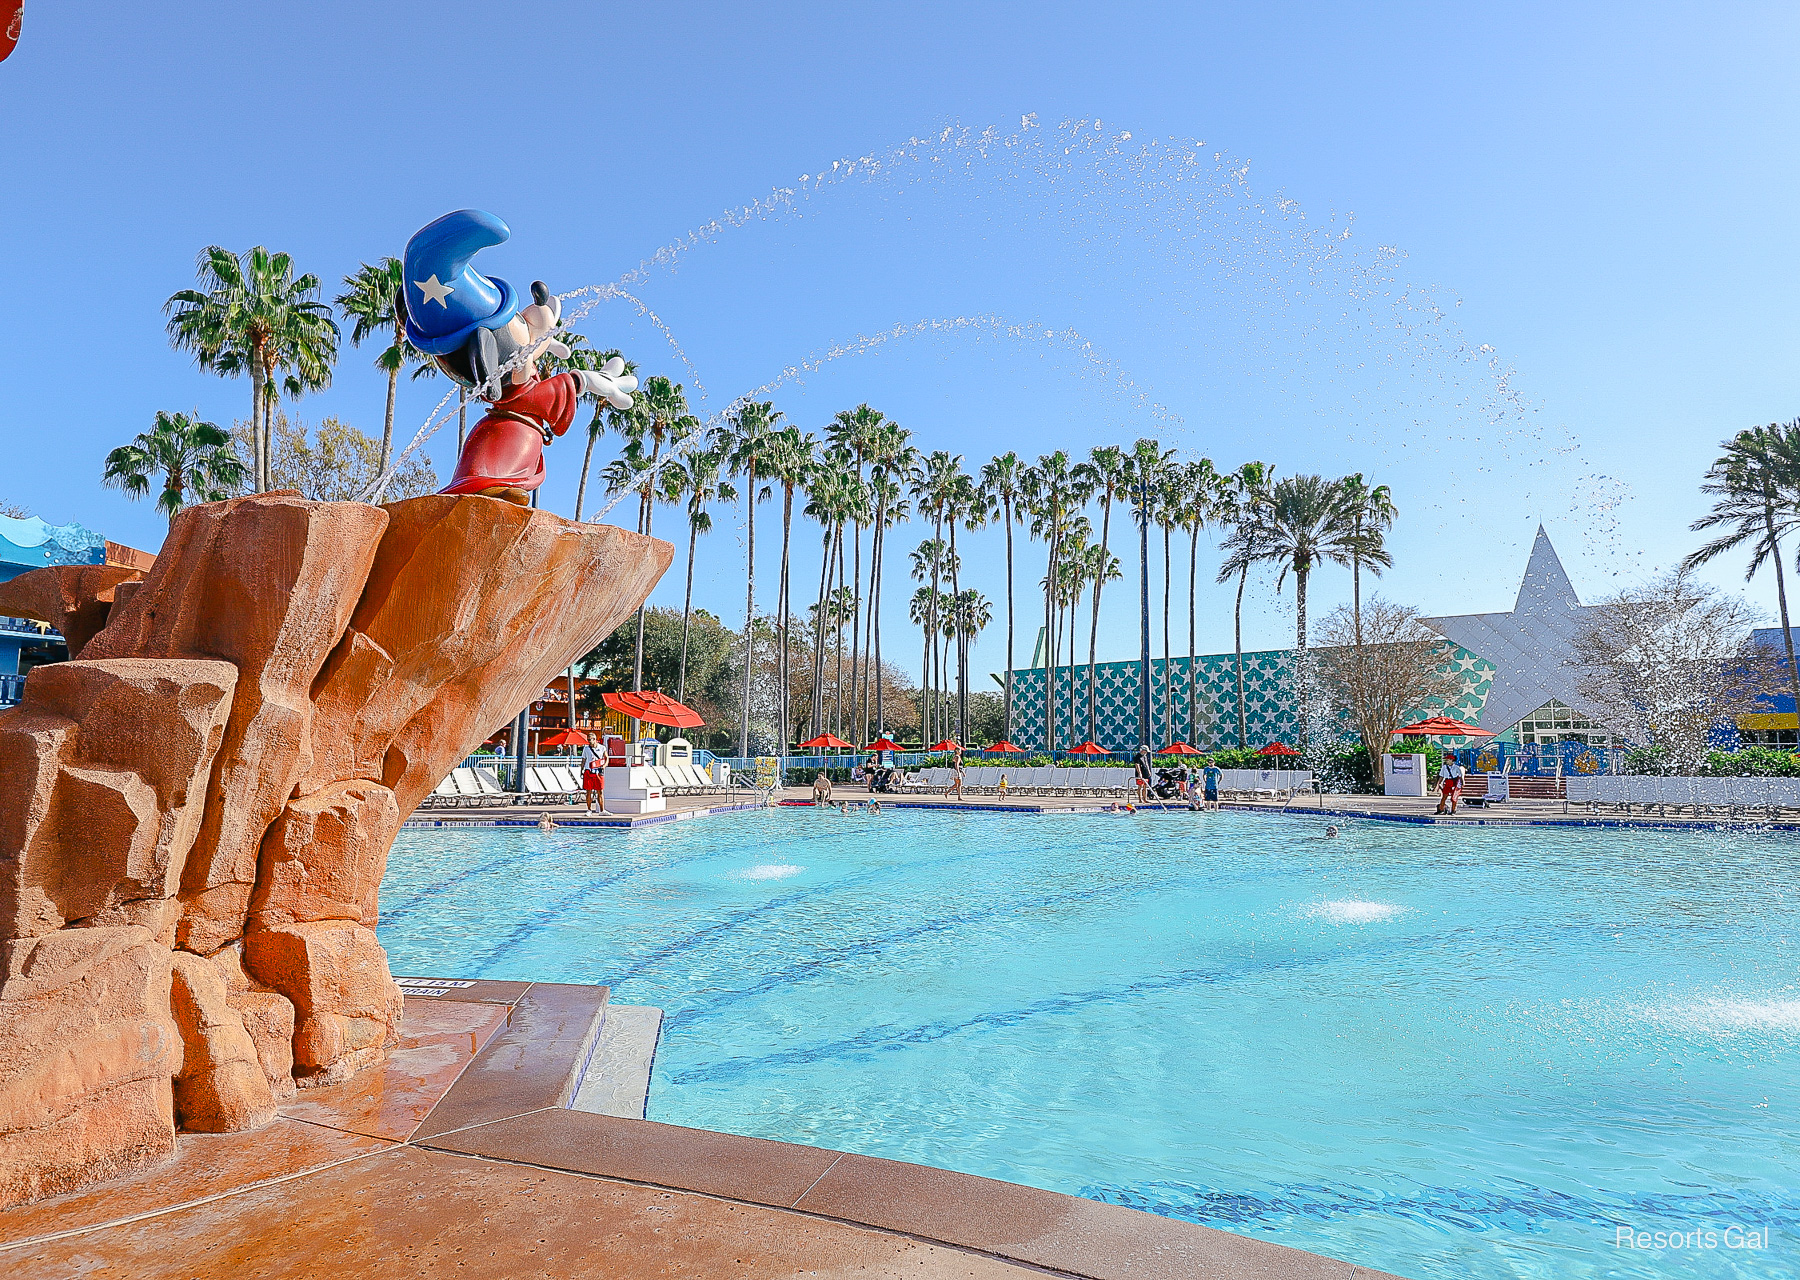 Fantasia Pool with Sorcerer Mickey water feature at All-Star Movies Resort 